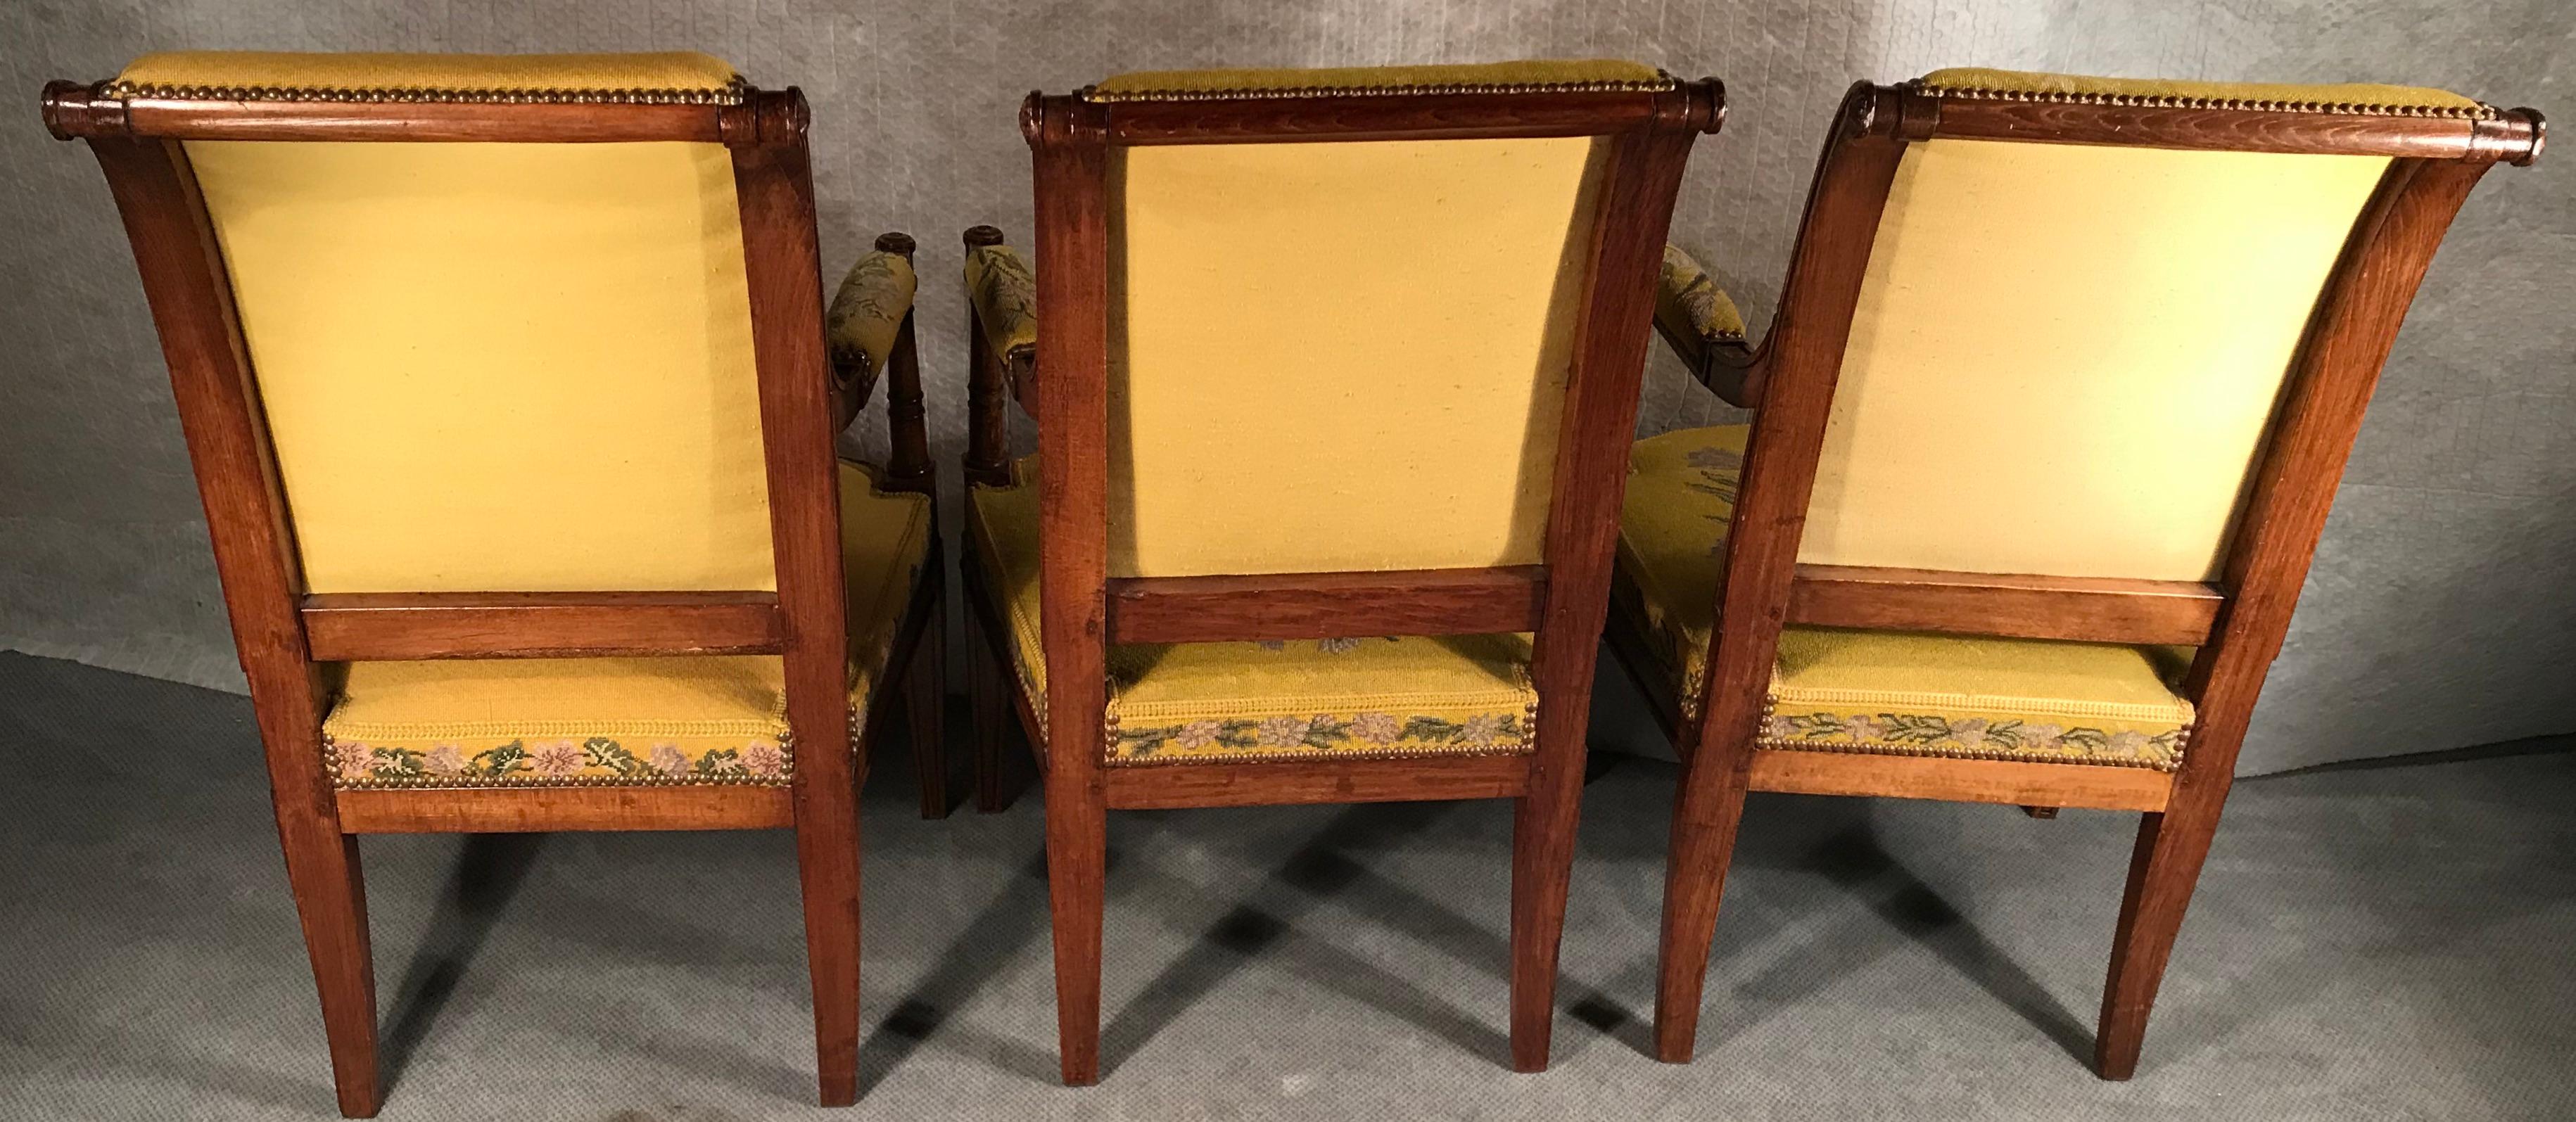 Hand-Carved Set of Three Armchairs, Directoire Style, France, 19th Century For Sale